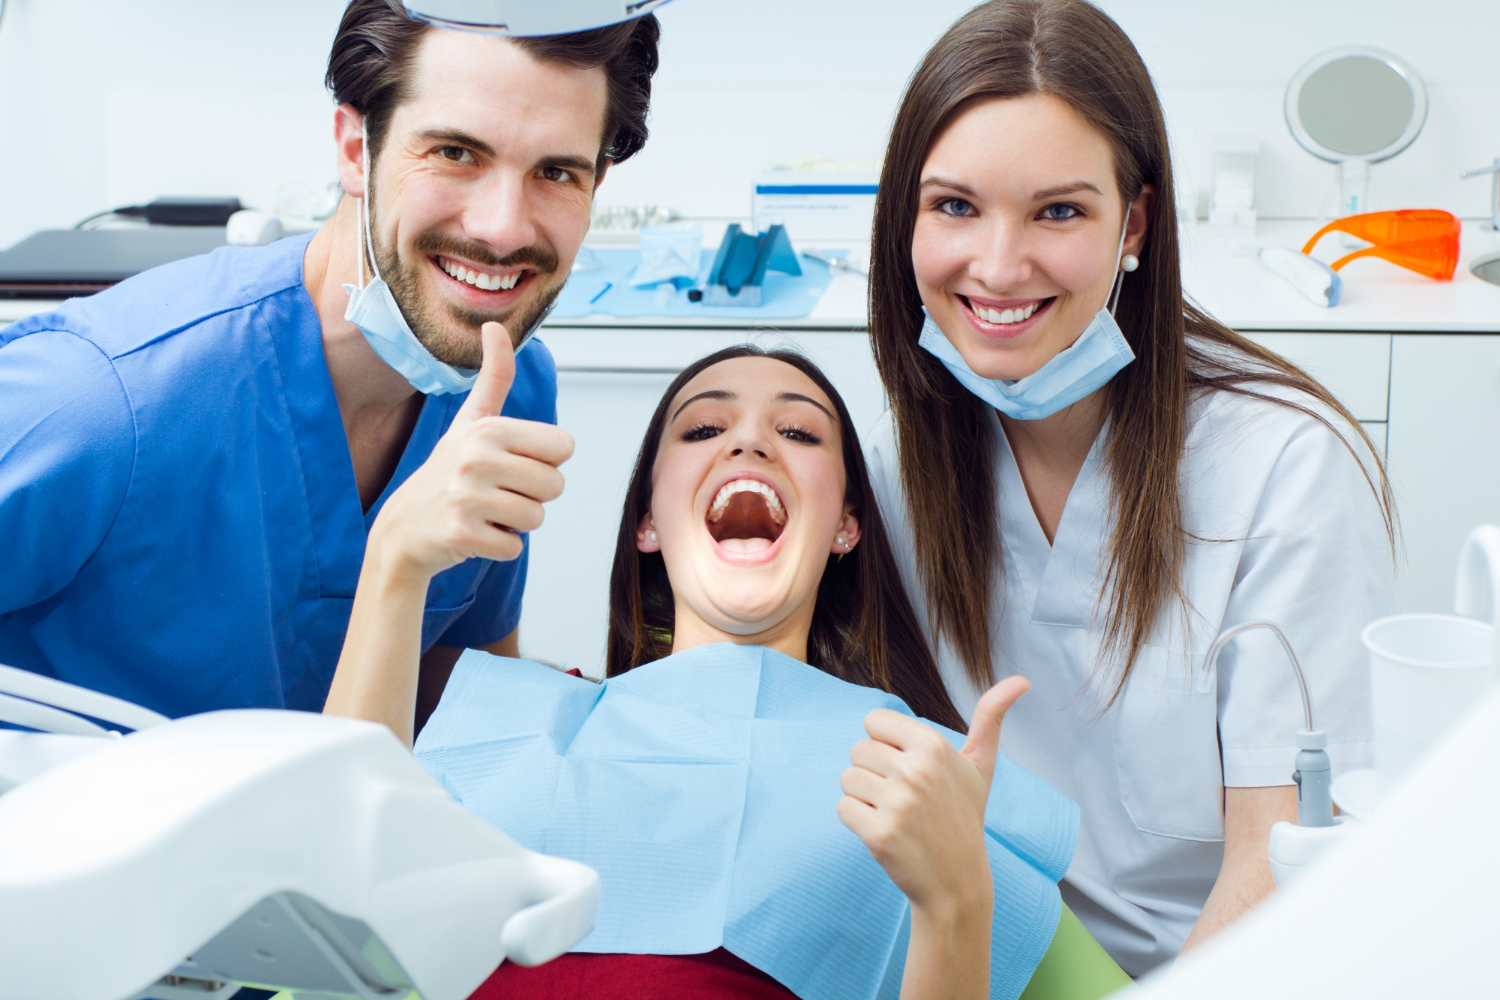 Looking for the Best Quality Same-Day Crown by Professionals? Visit Brooklyn Blvd Dental Today!